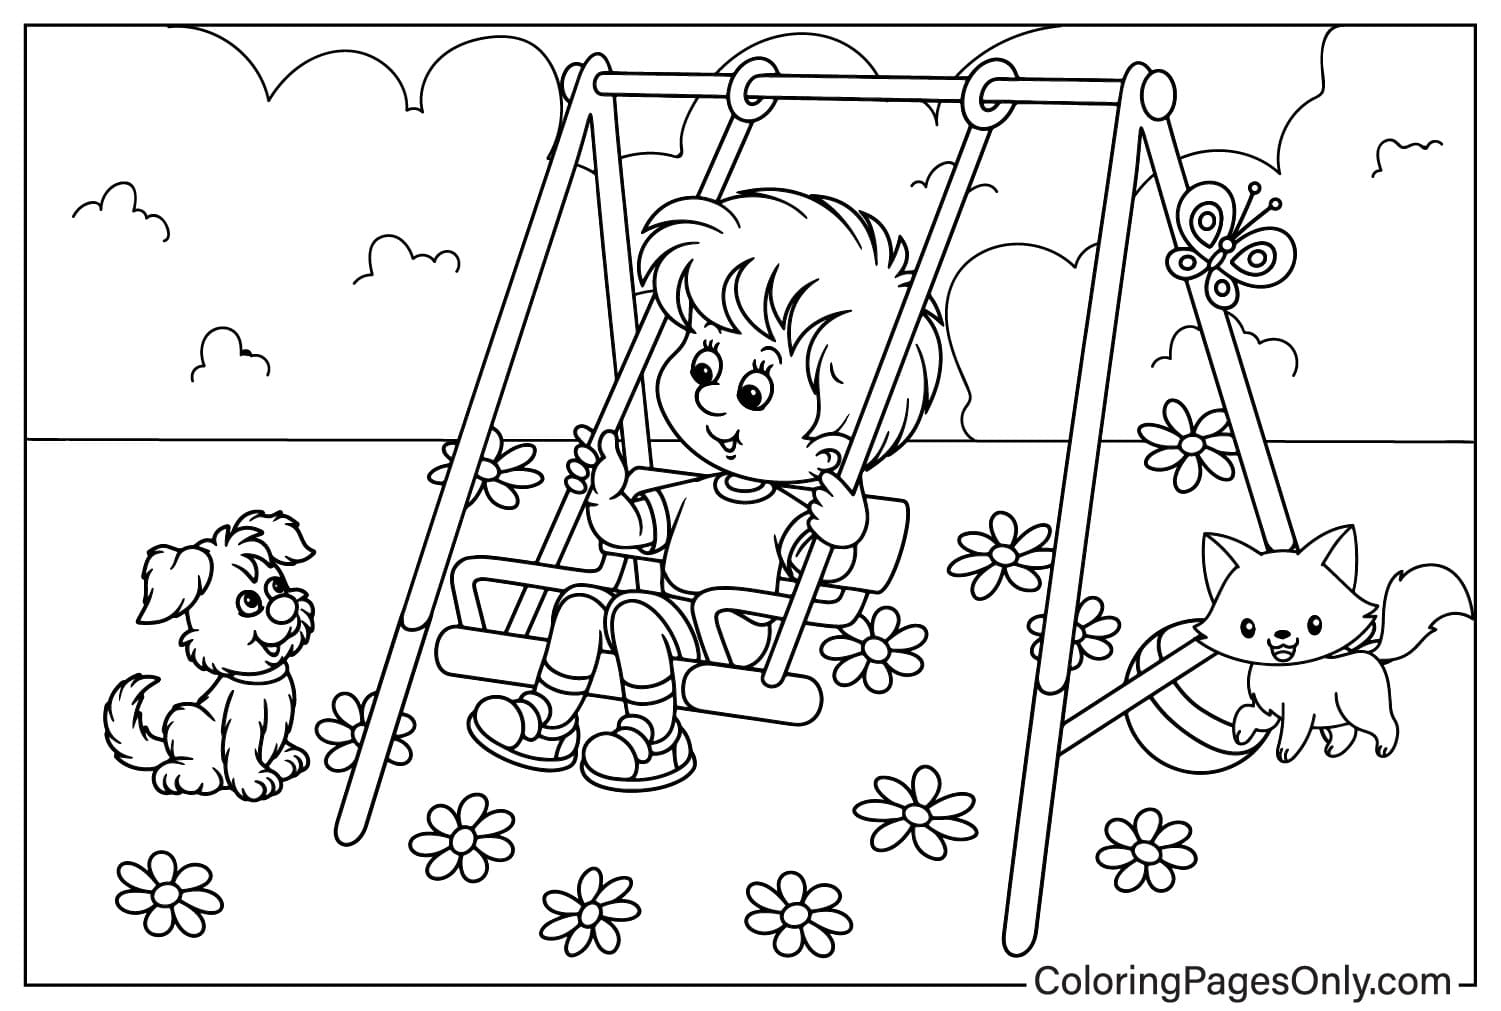 Print Playground Coloring Page from Playground